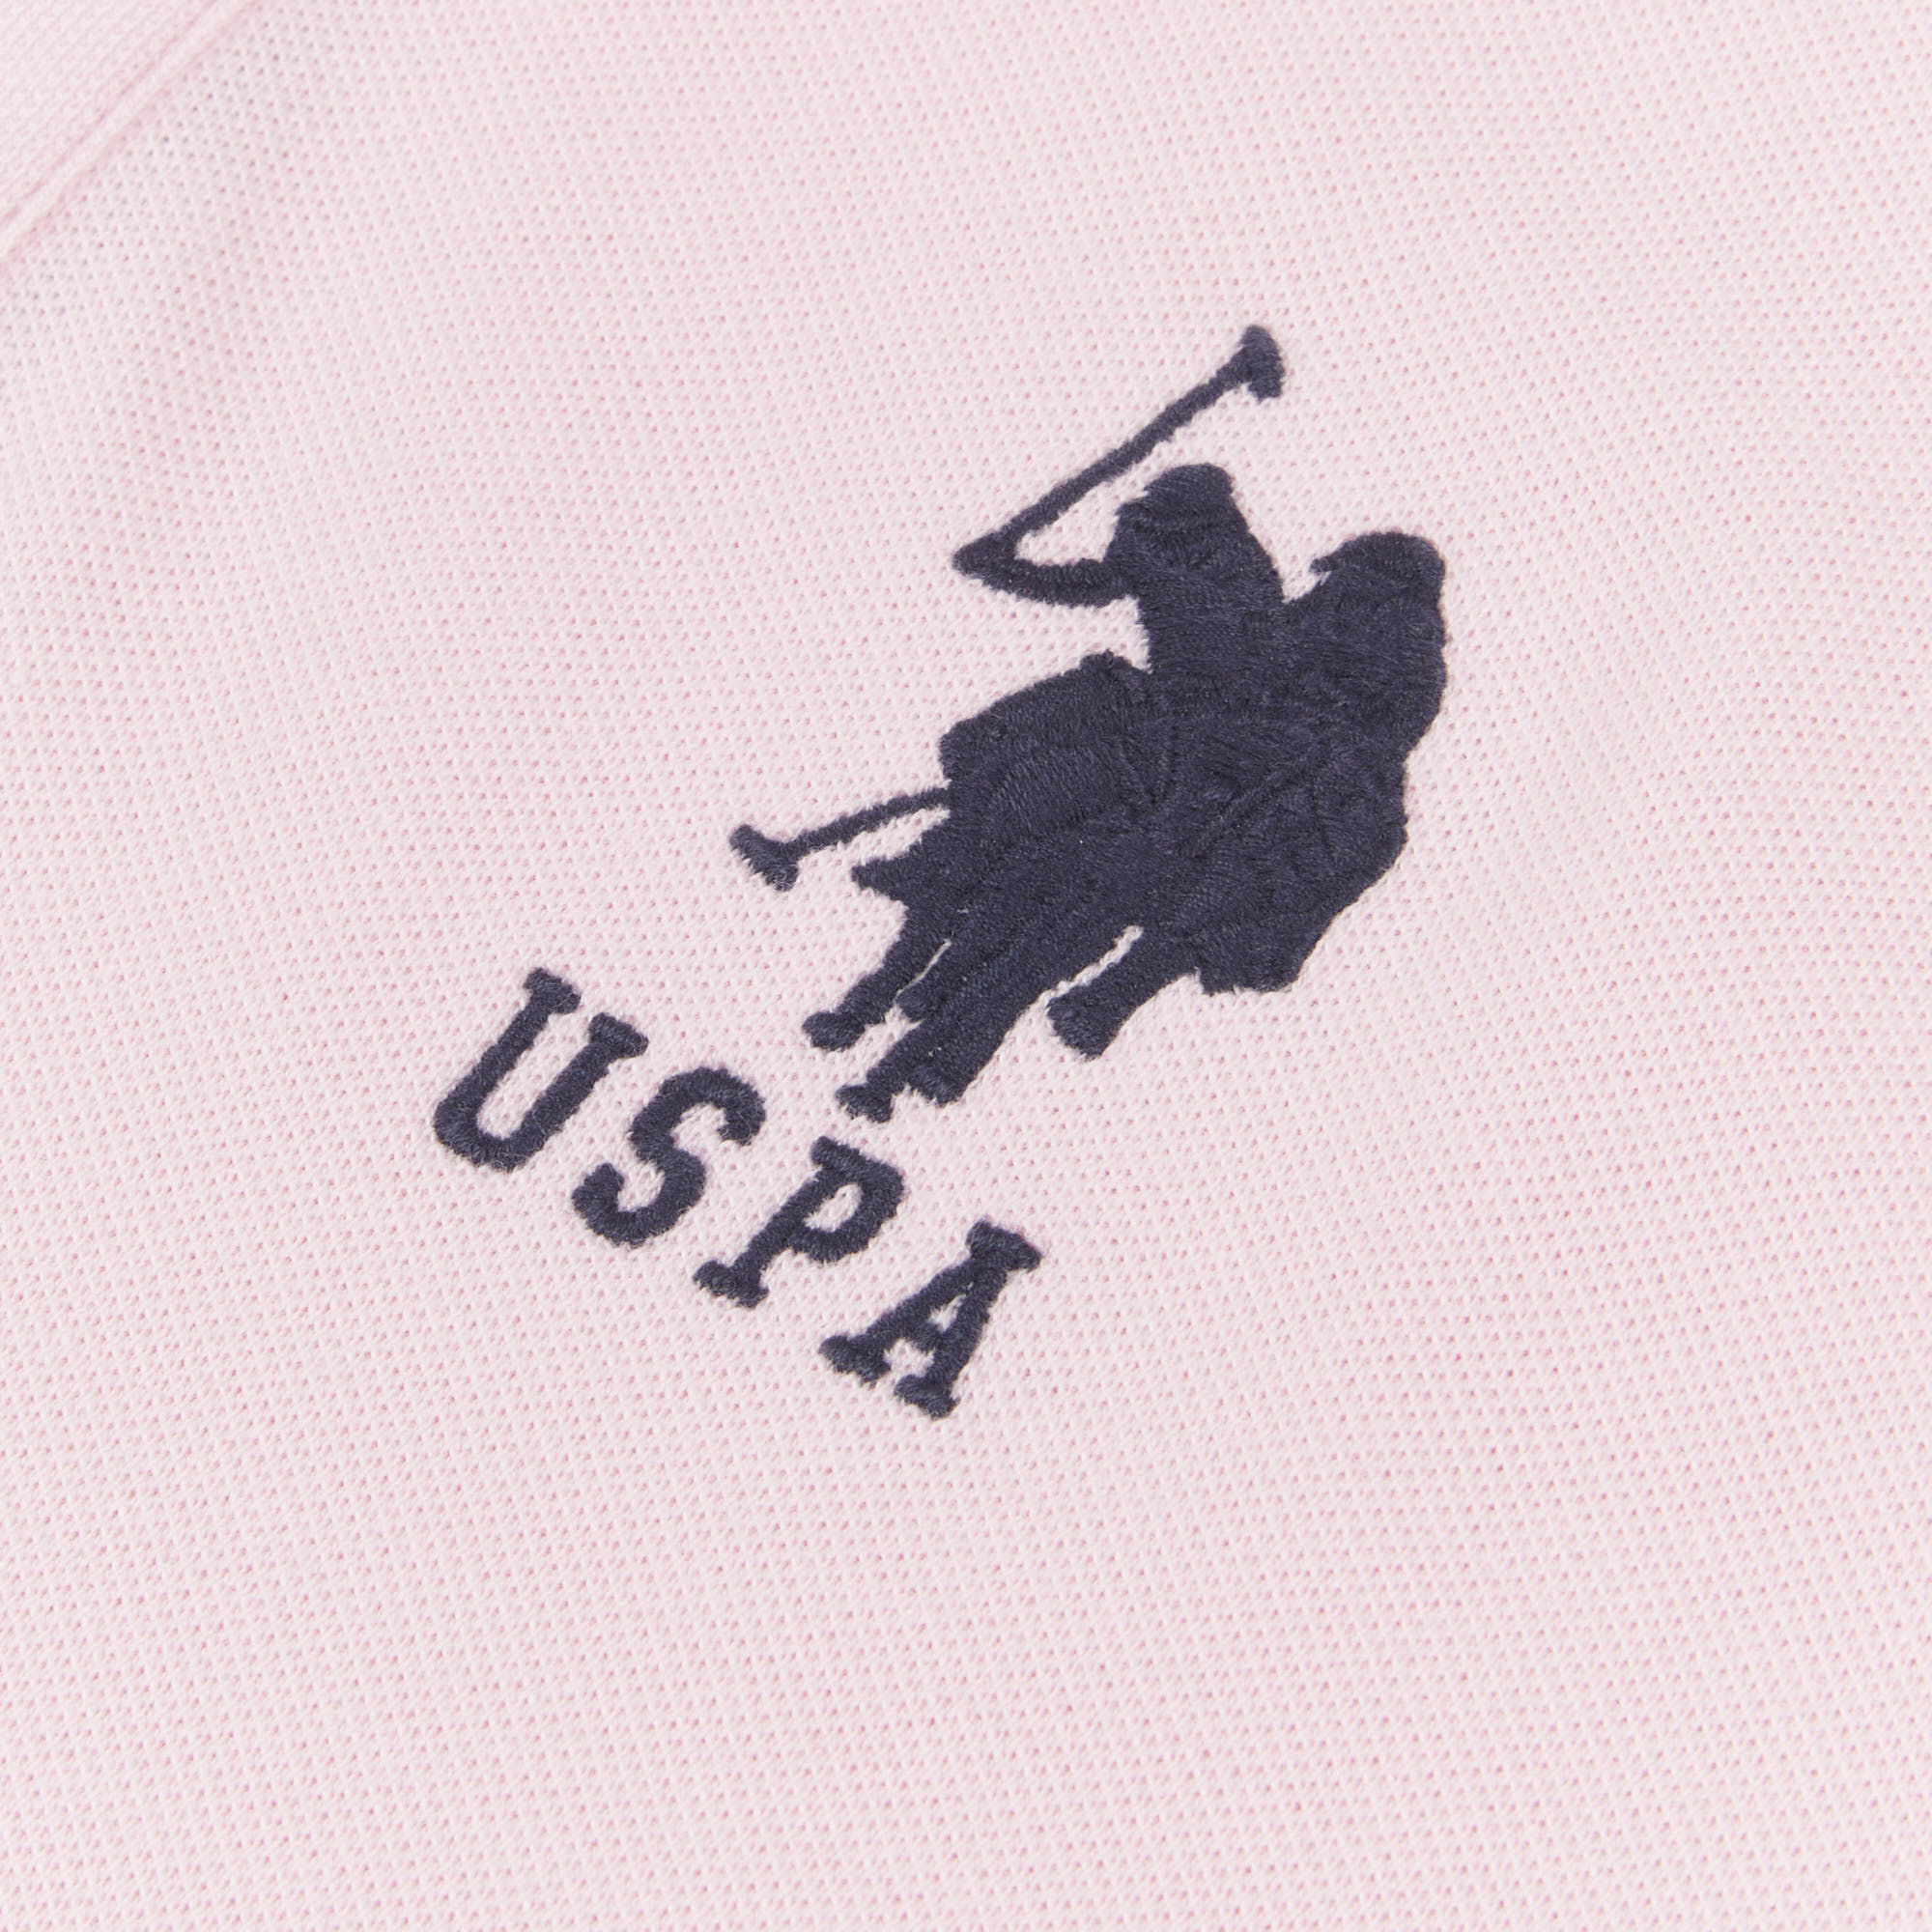 Mens Big & Tall Player 3 Polo Shirt in Orchid Pink